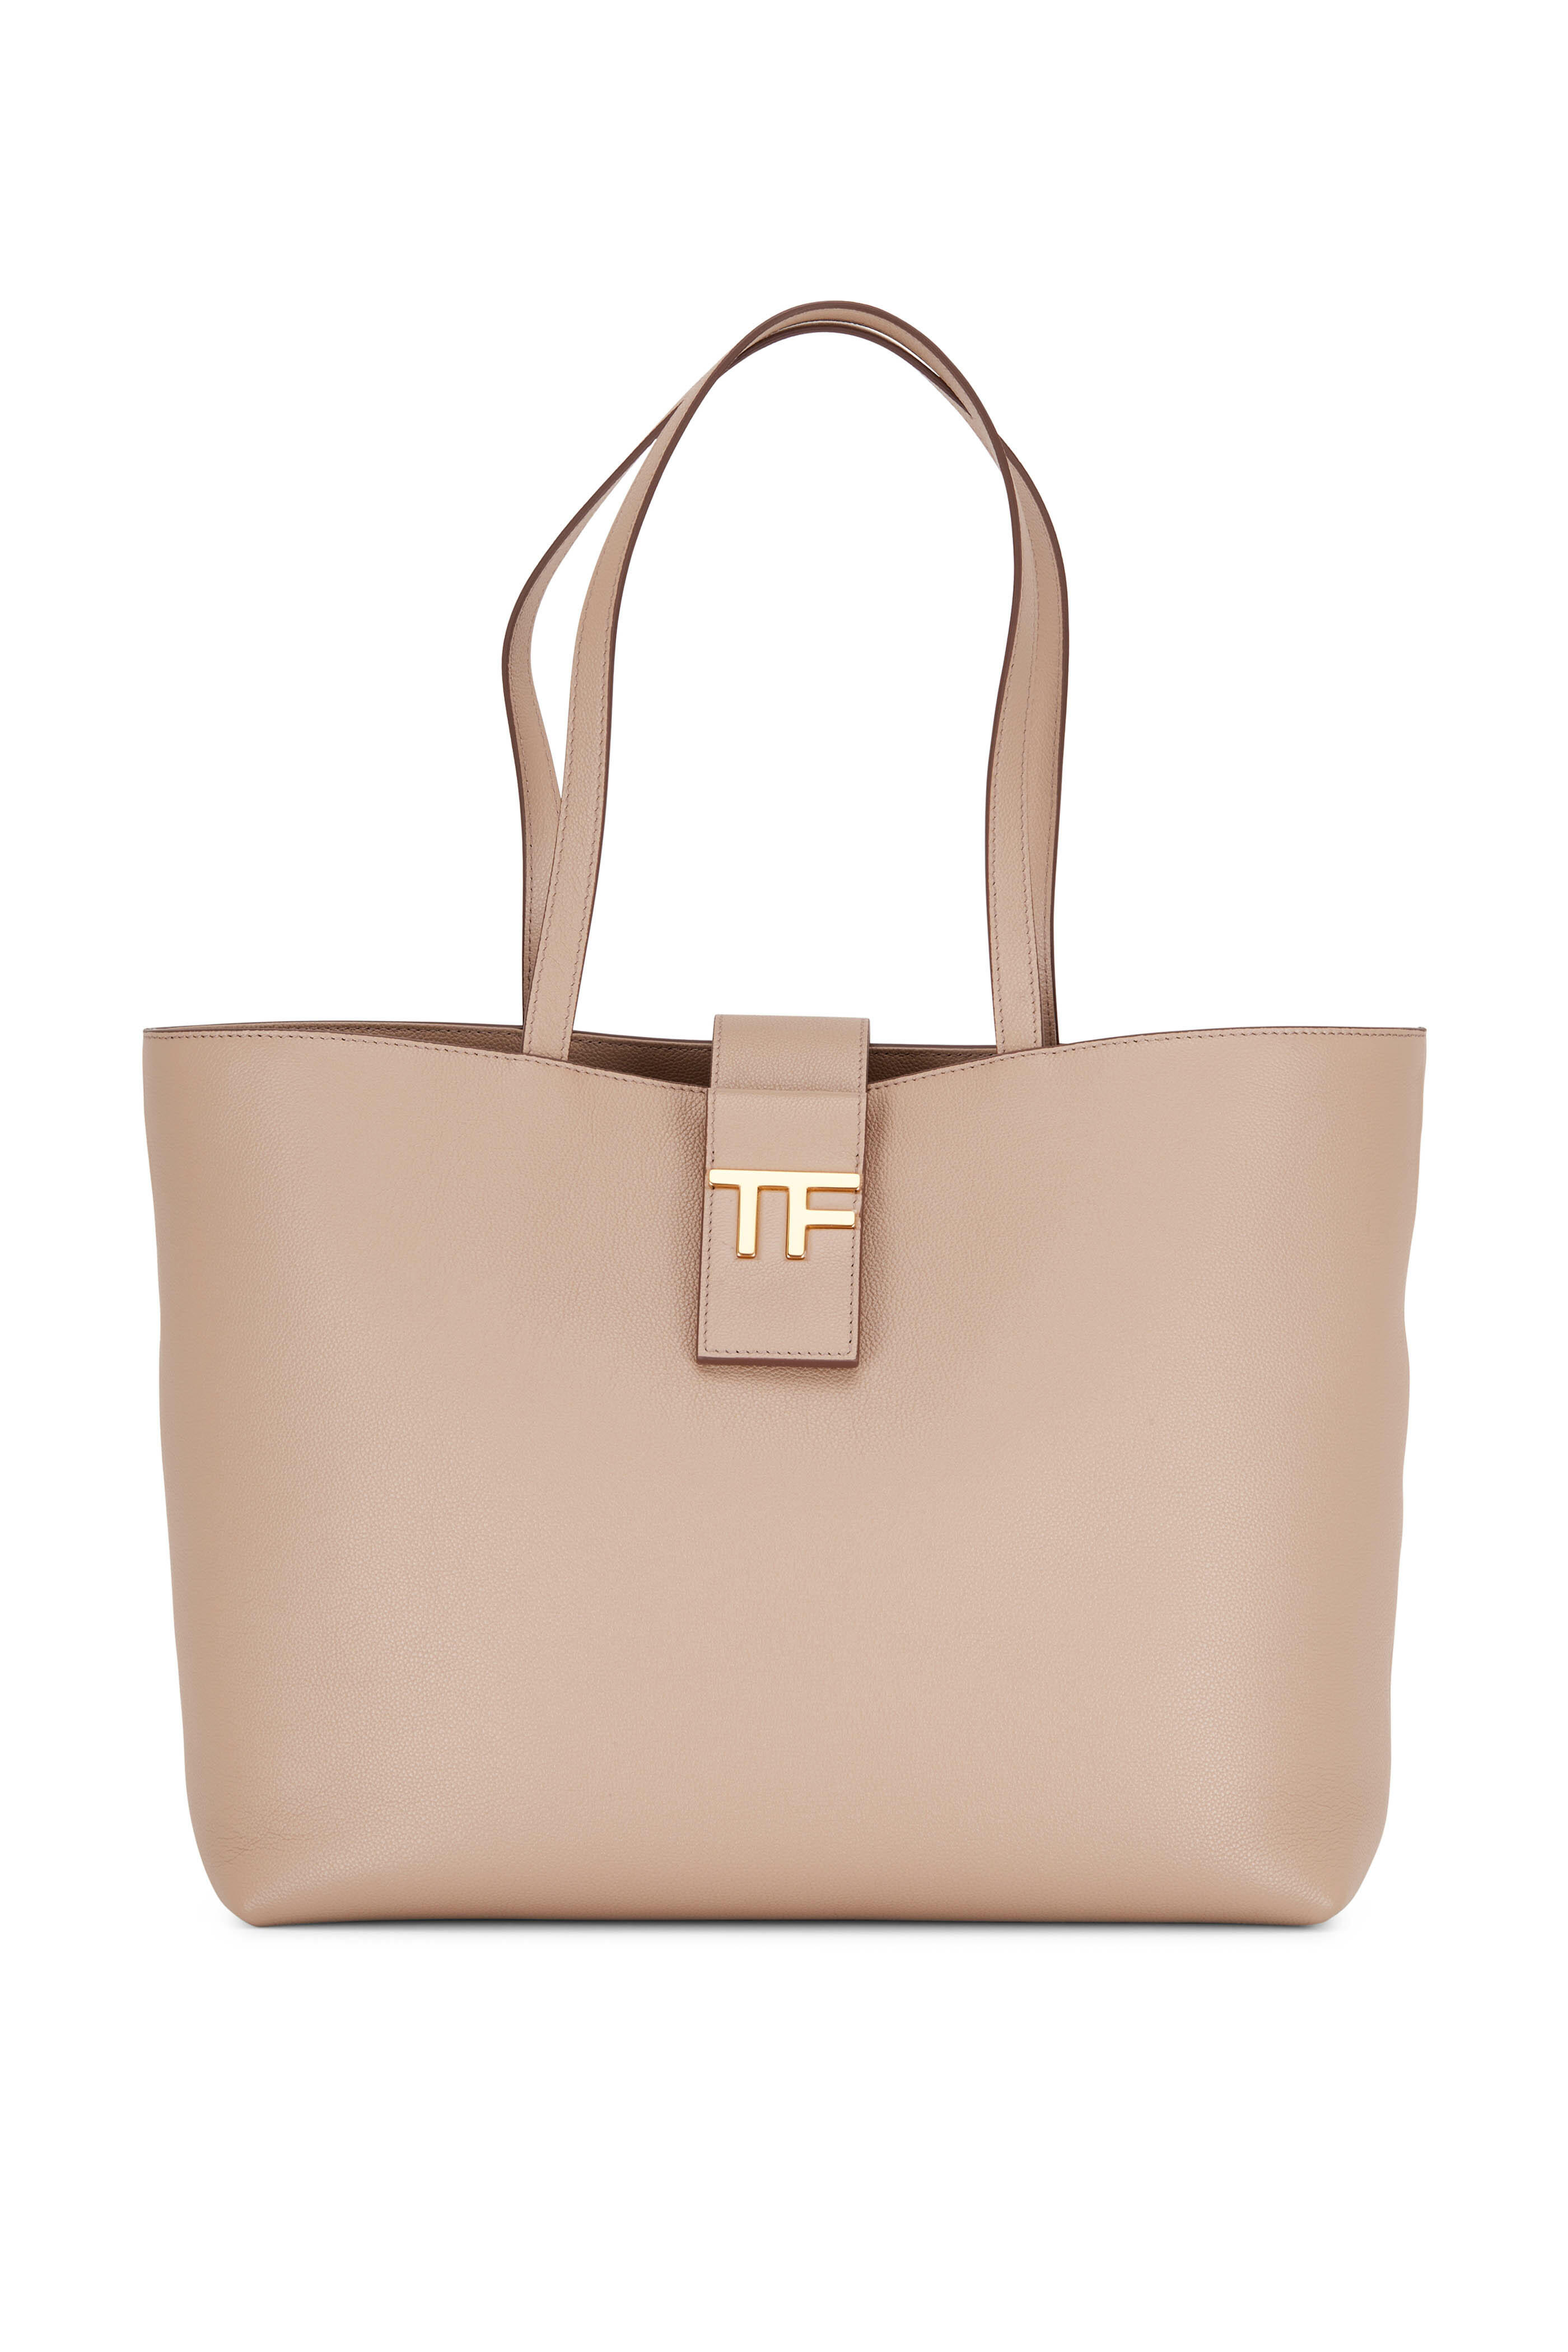 Tom Ford - Silk Taupe Grained Leather Tote Bag | Mitchell Stores